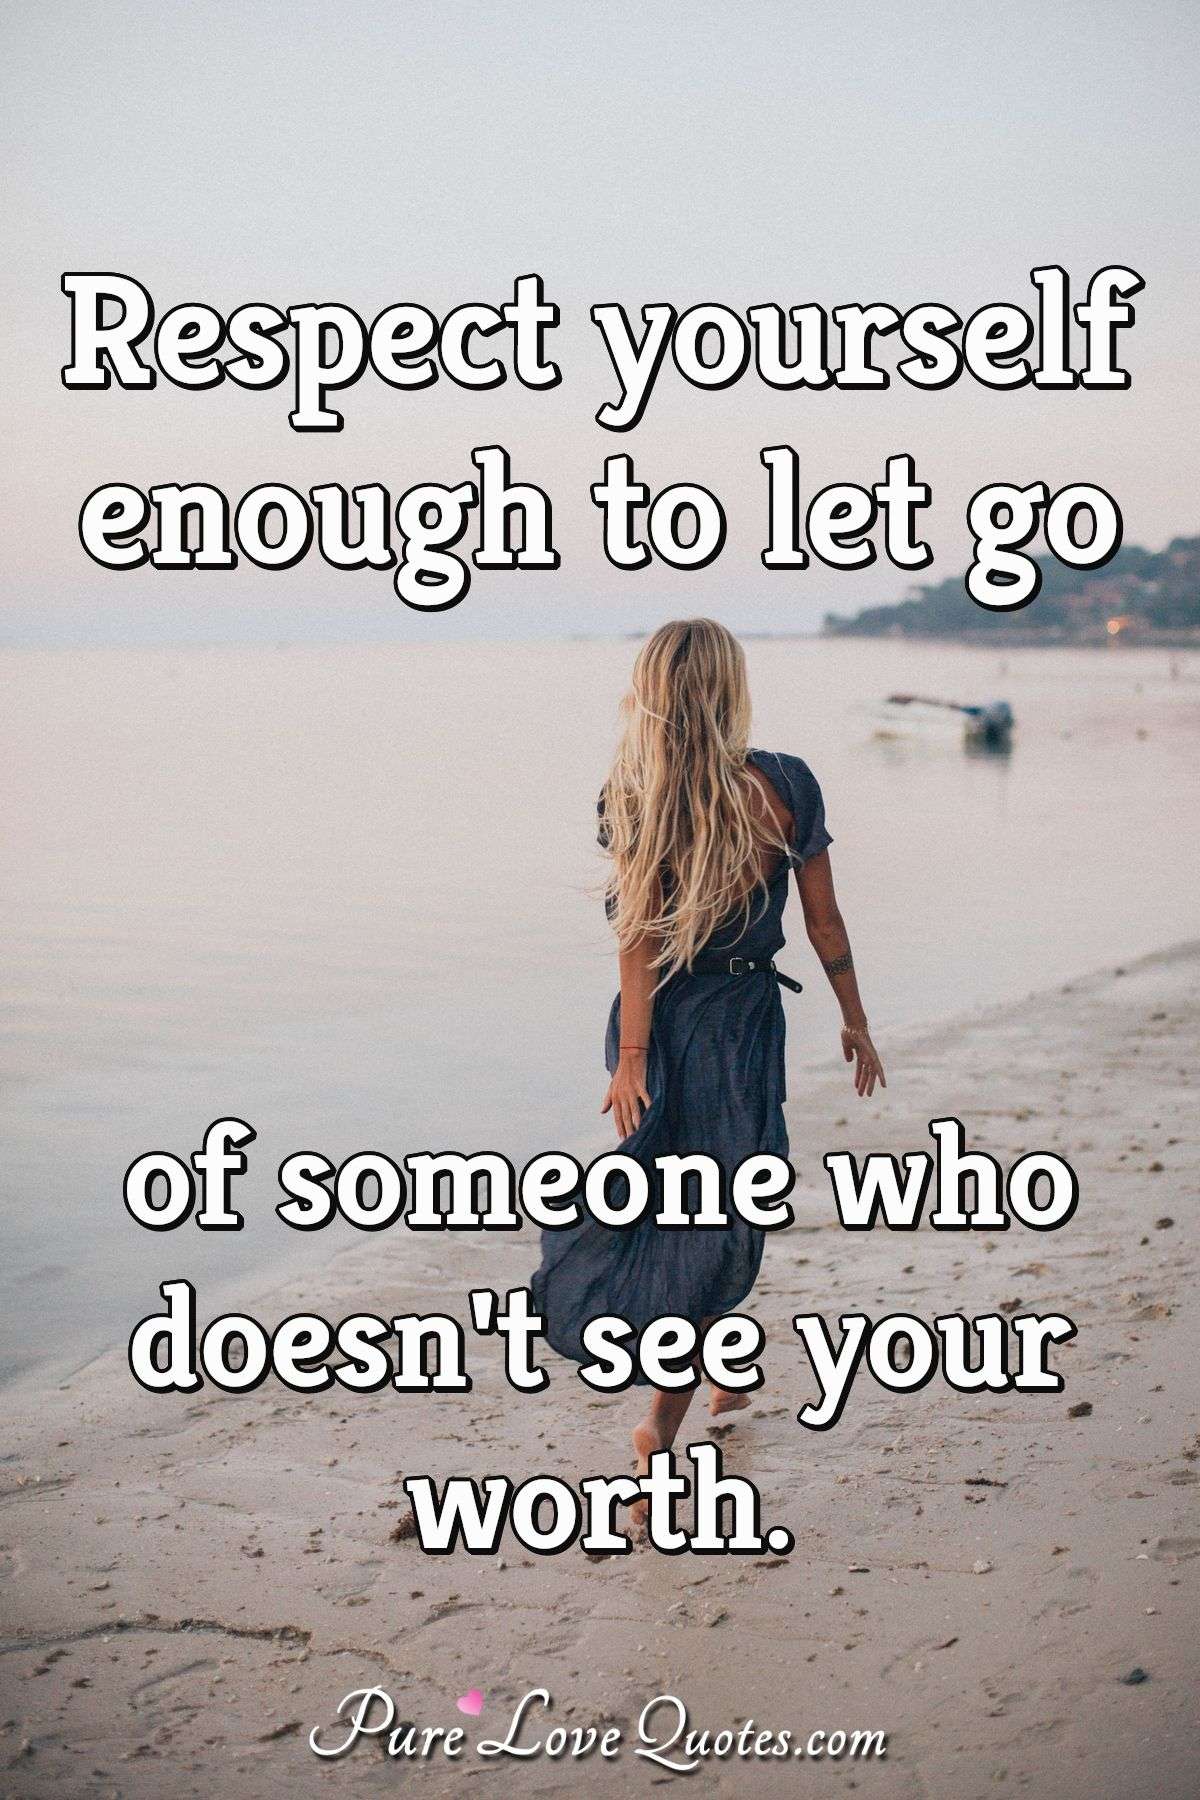 Respect yourself enough to let go of someone who doesn't see your worth. - Anonymous